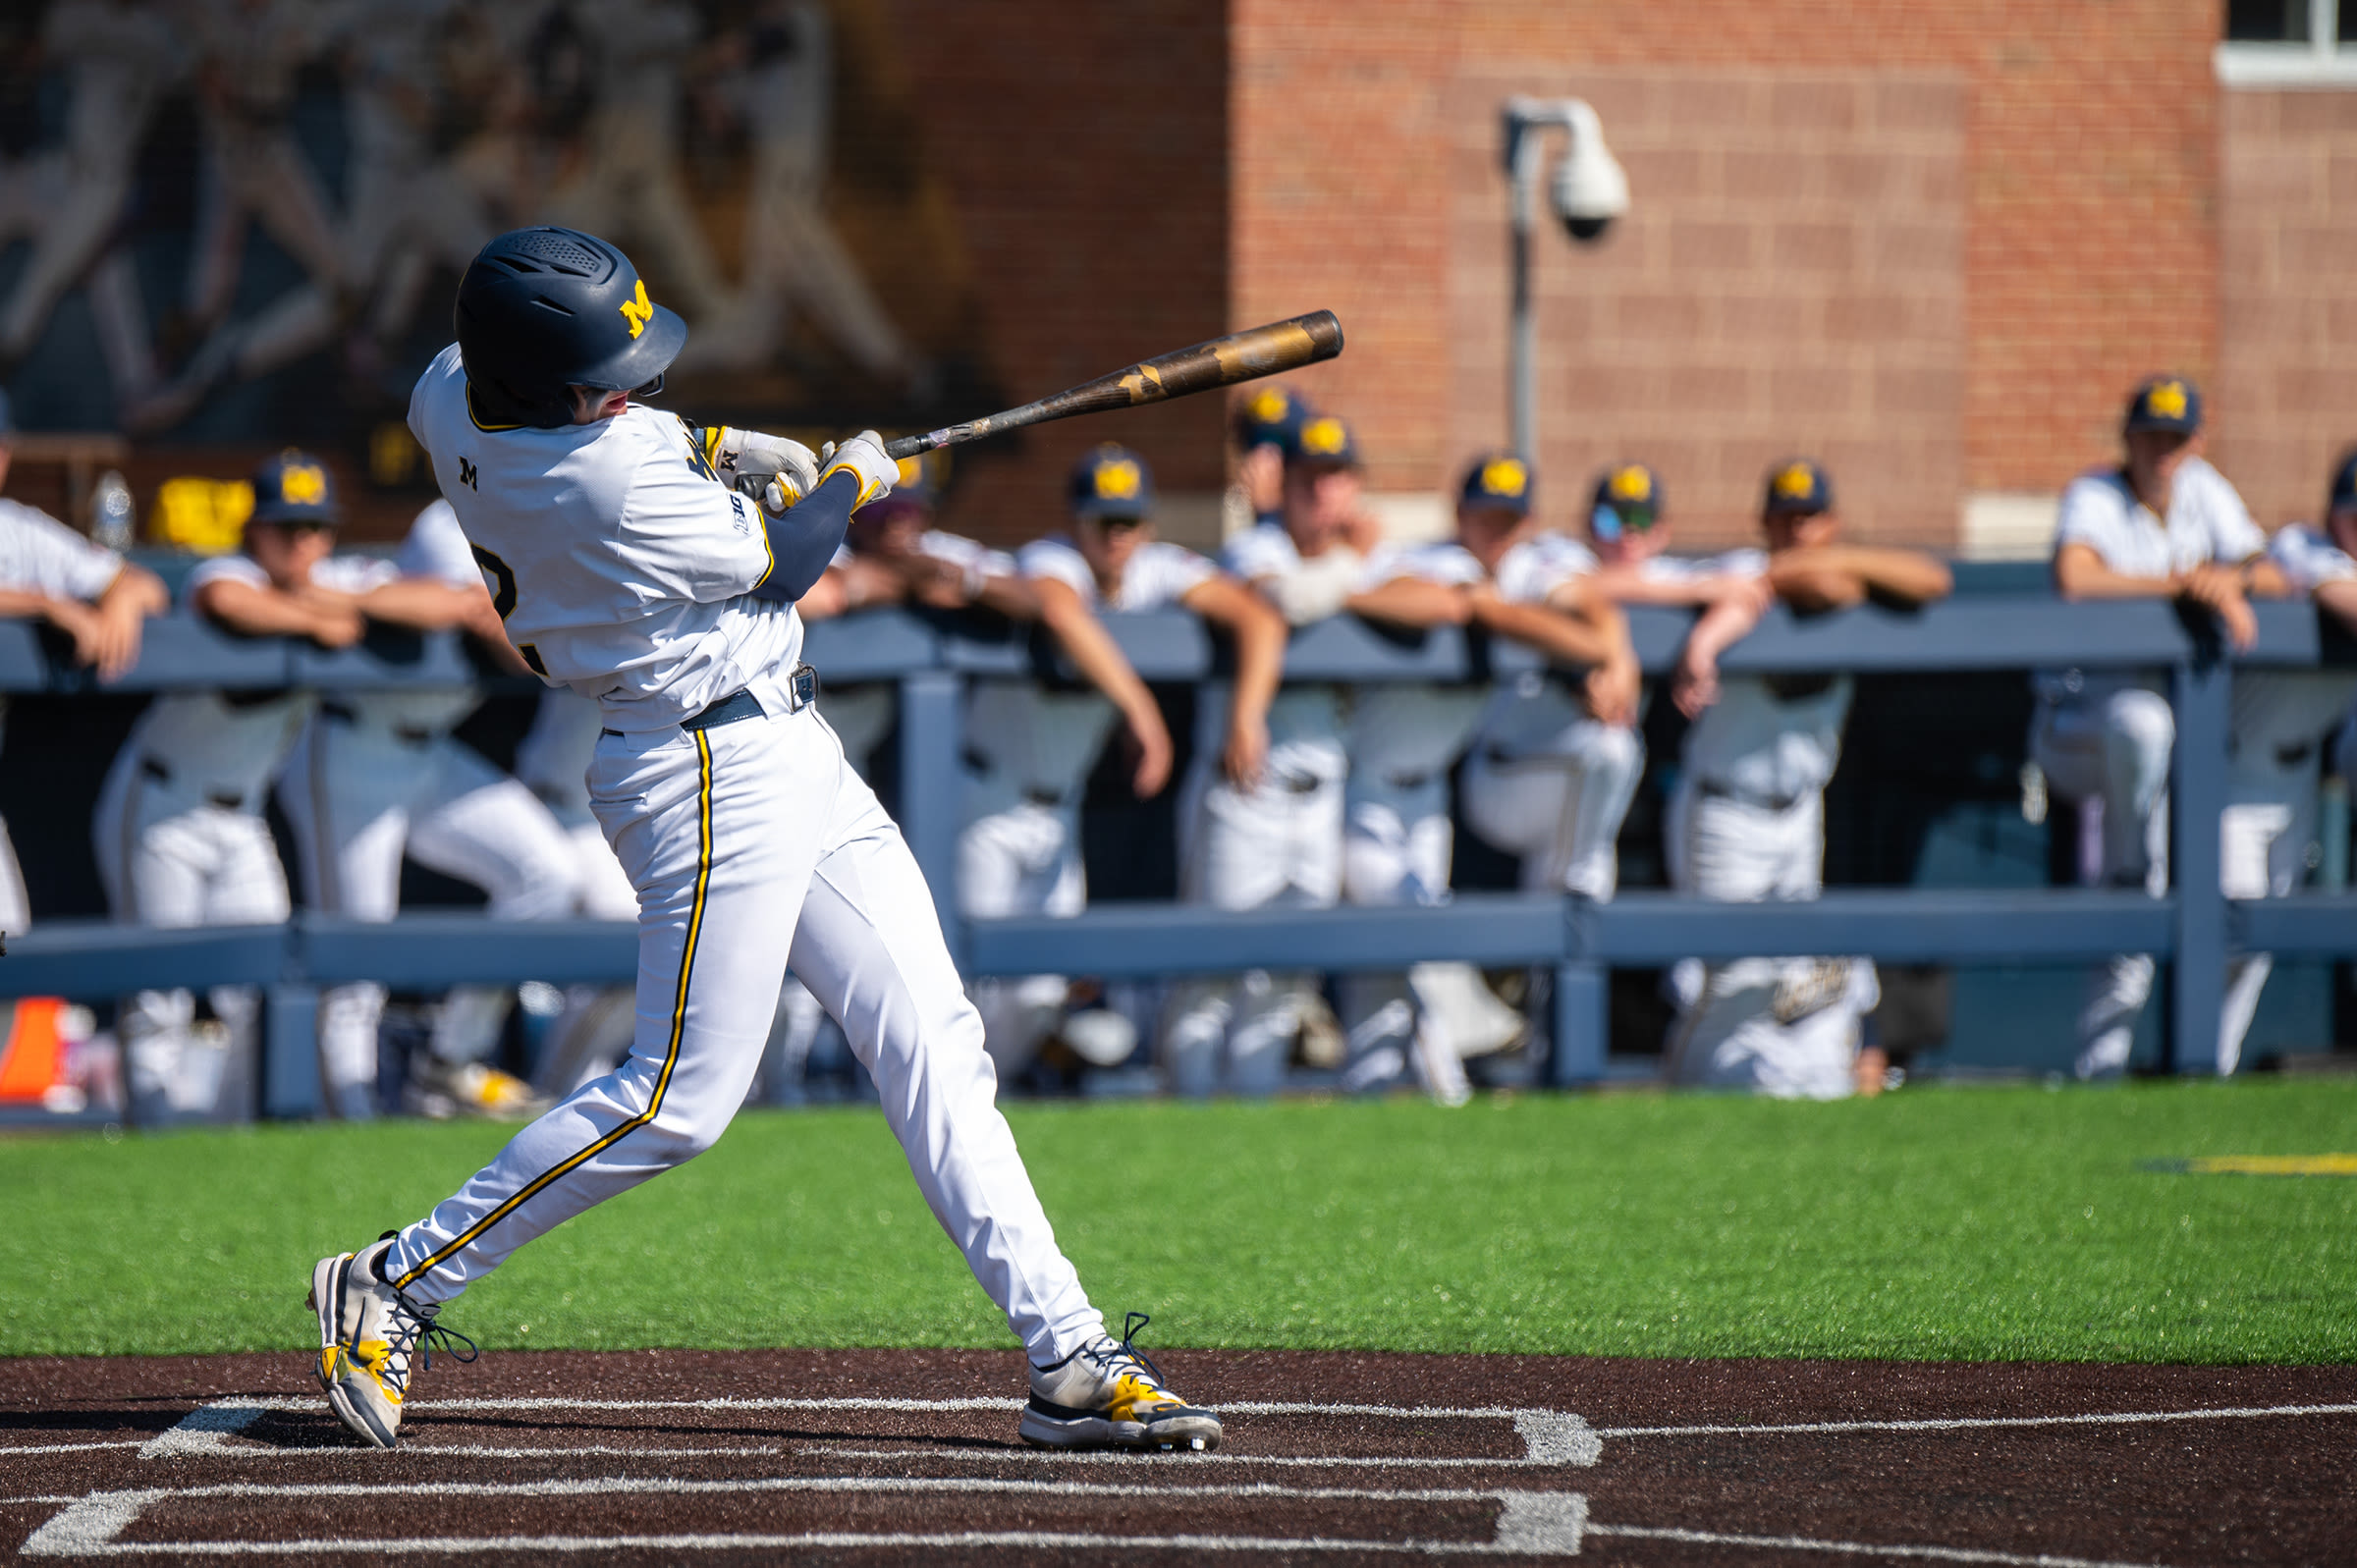 Offense propels Michigan to 9-5 win over Central Michigan